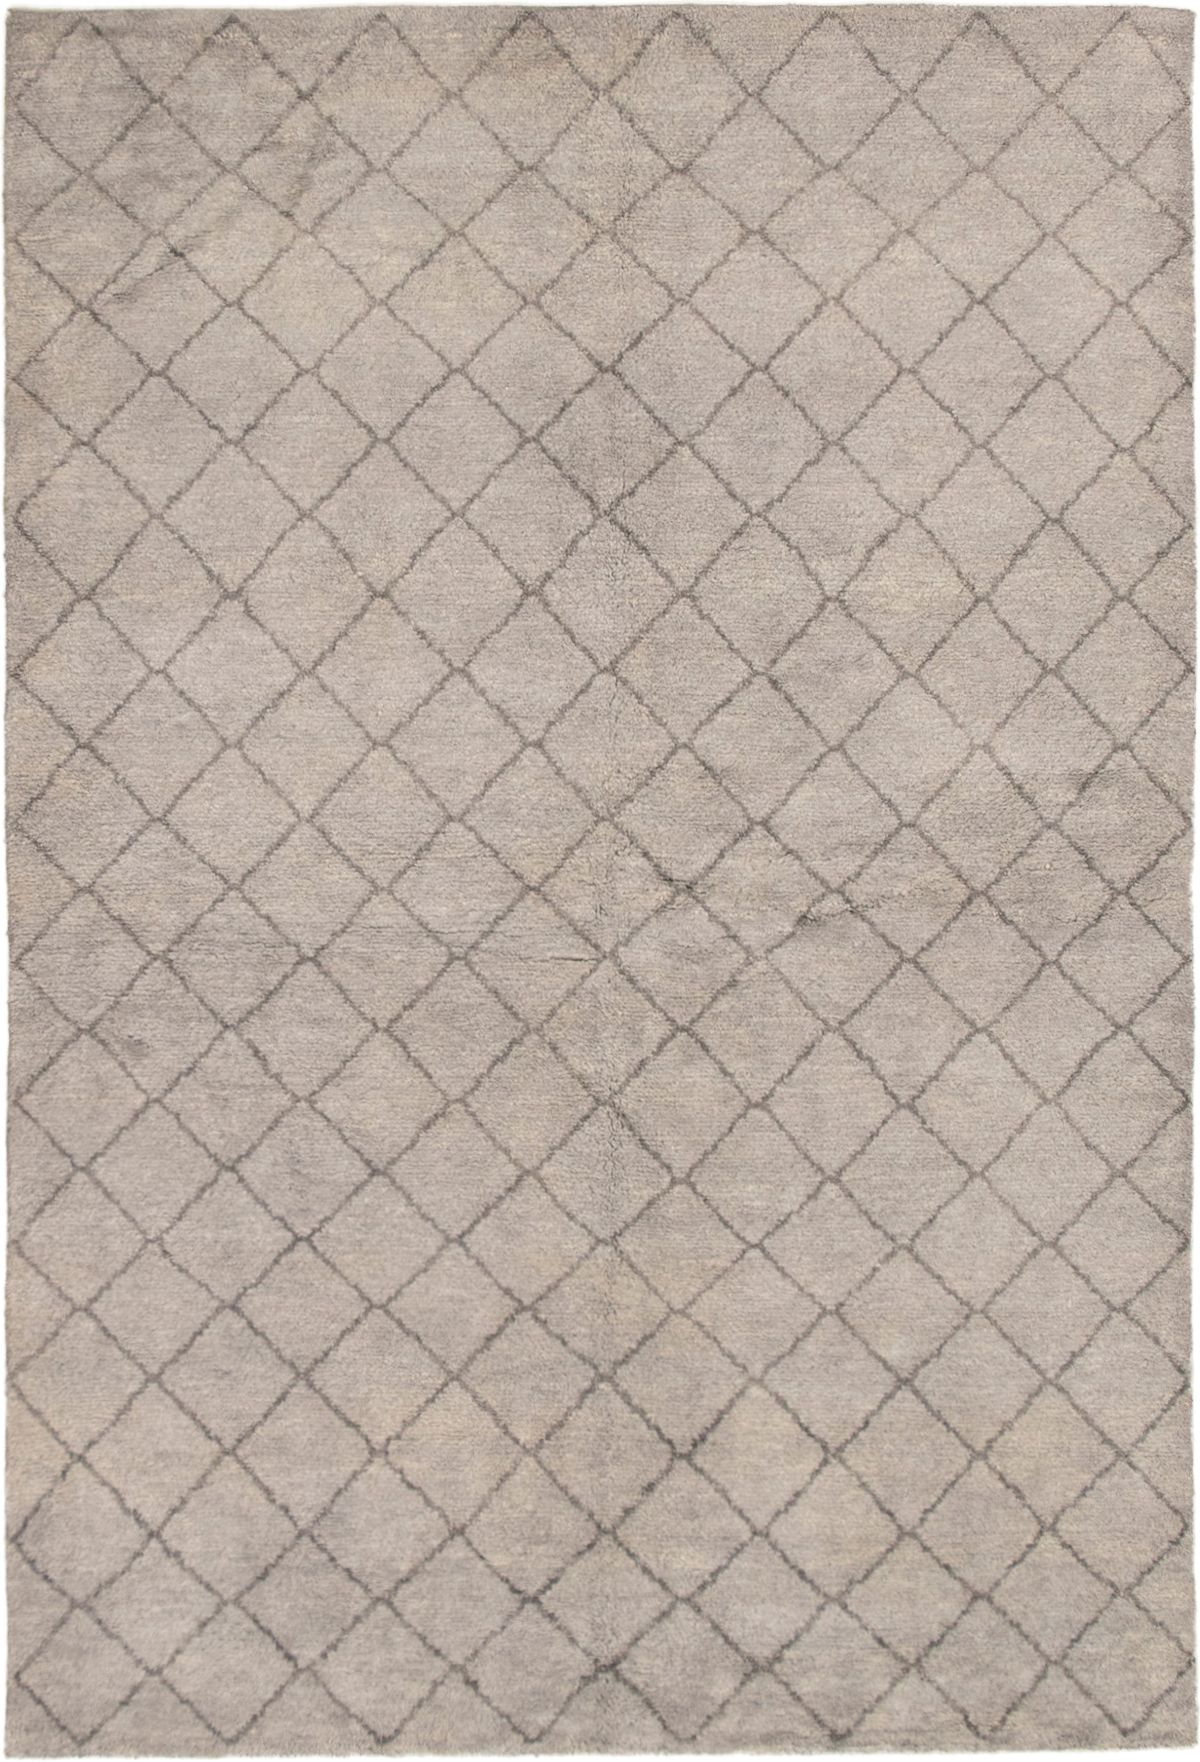 Hand-knotted Arlequin Grey Wool Rug 6'7" x 9'10" Size: 6'7" x 9'10"  